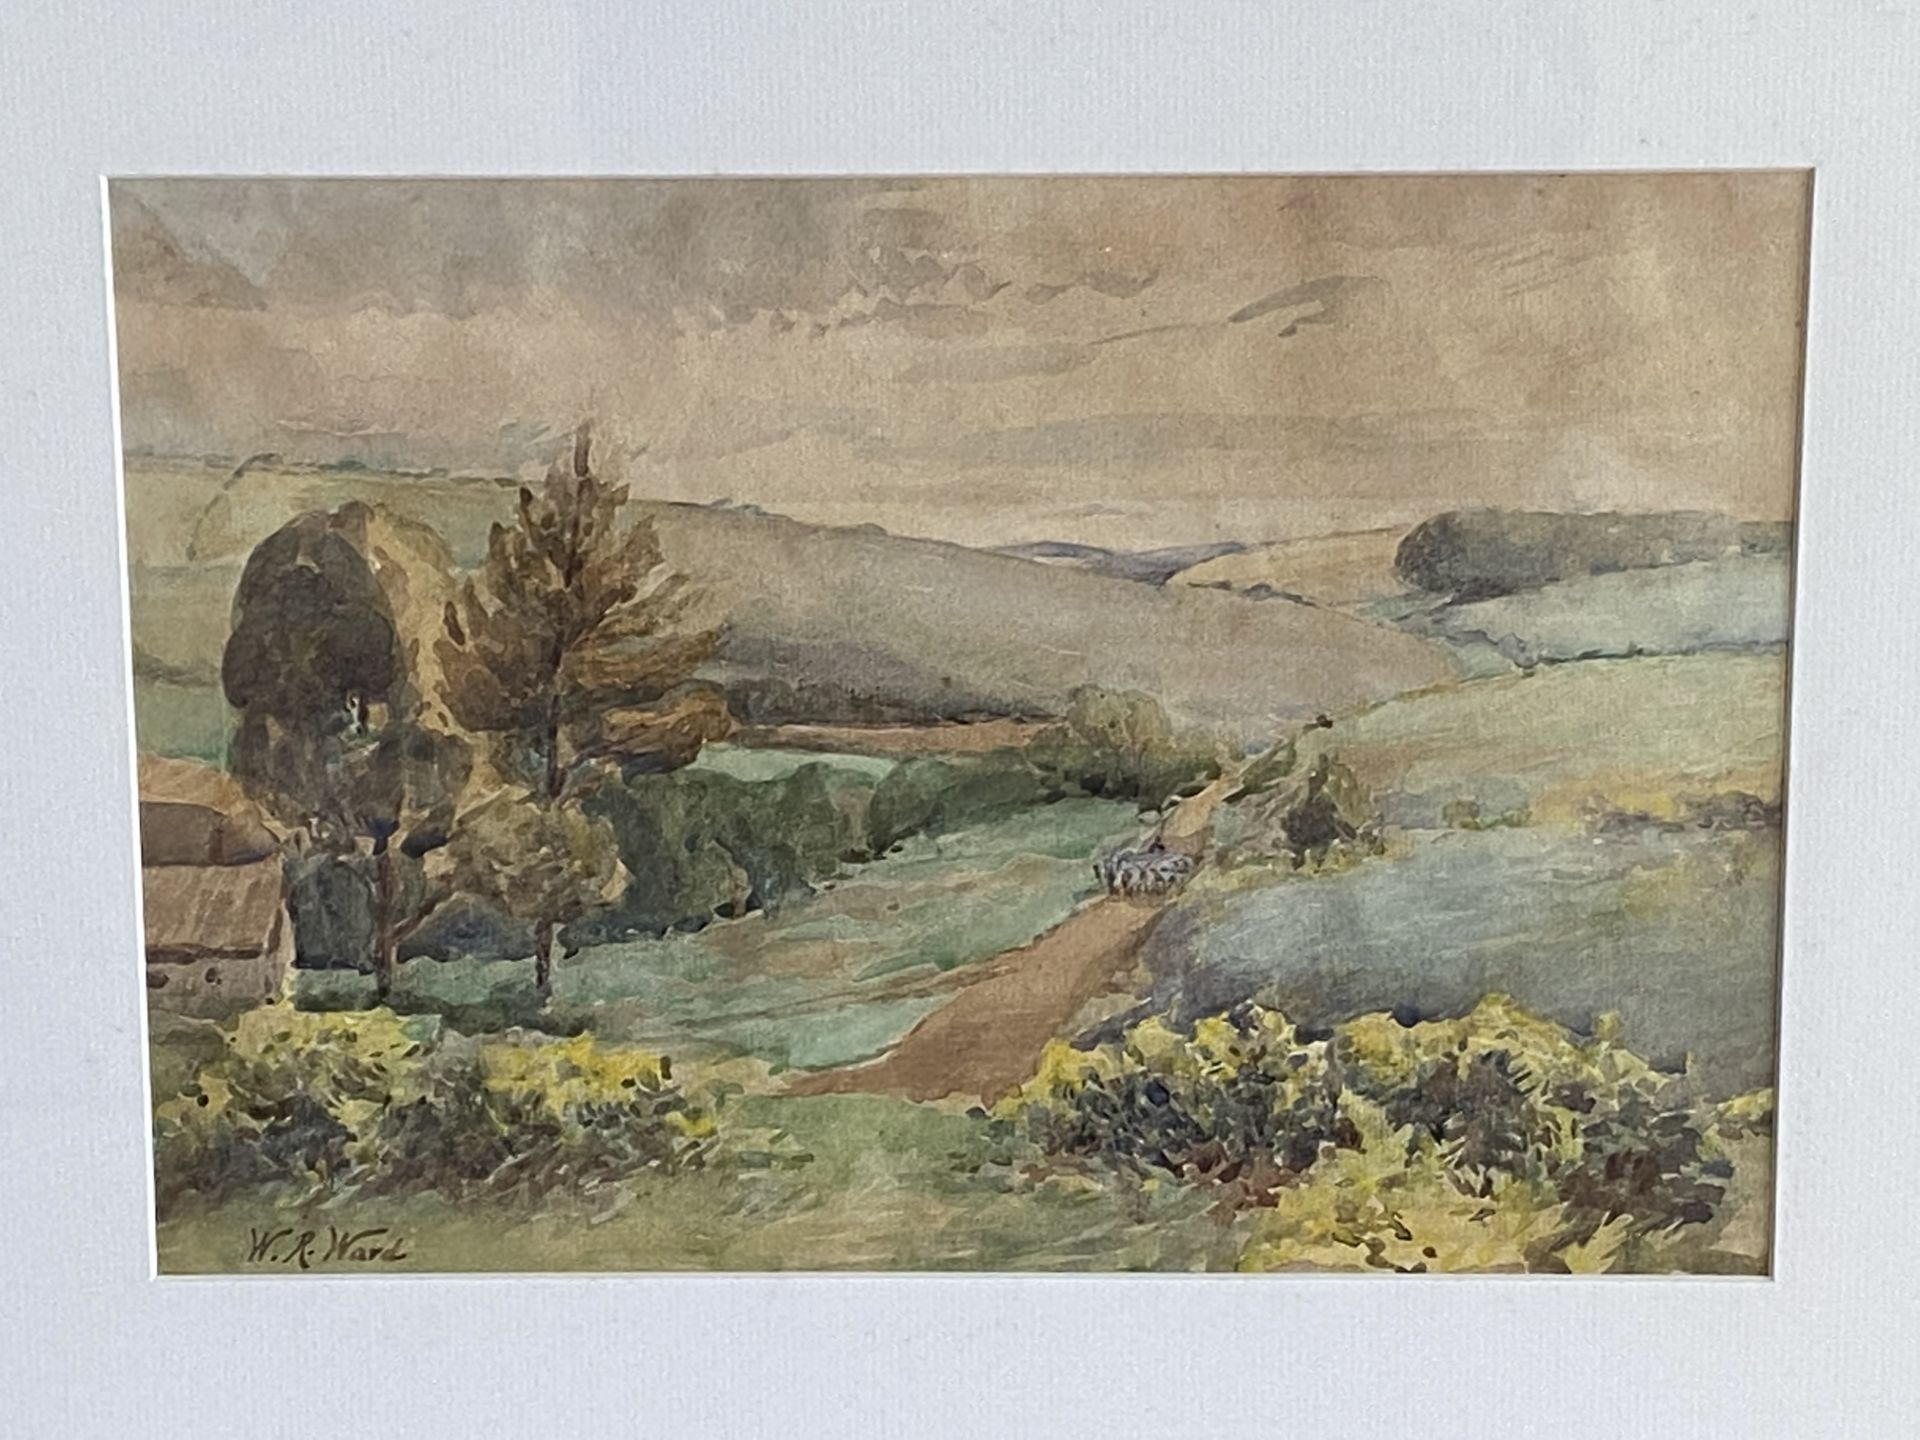 W.R. Ward - framed and glazed watercolour - Image 2 of 3